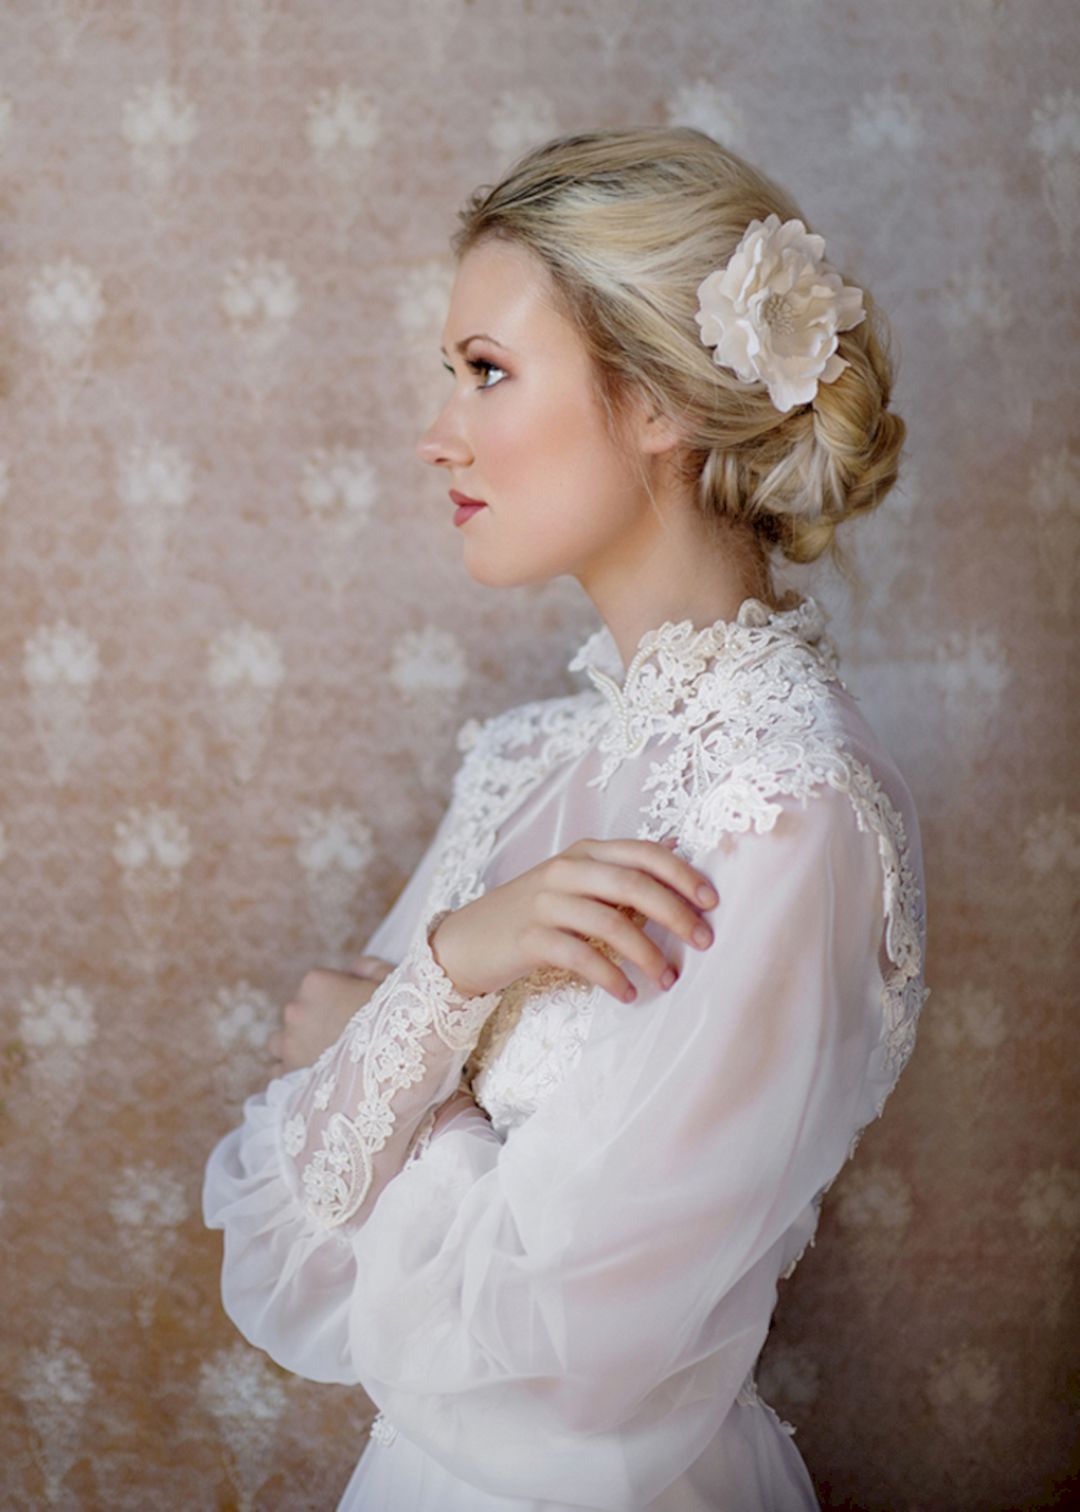 Vintage with lace dress from archzine